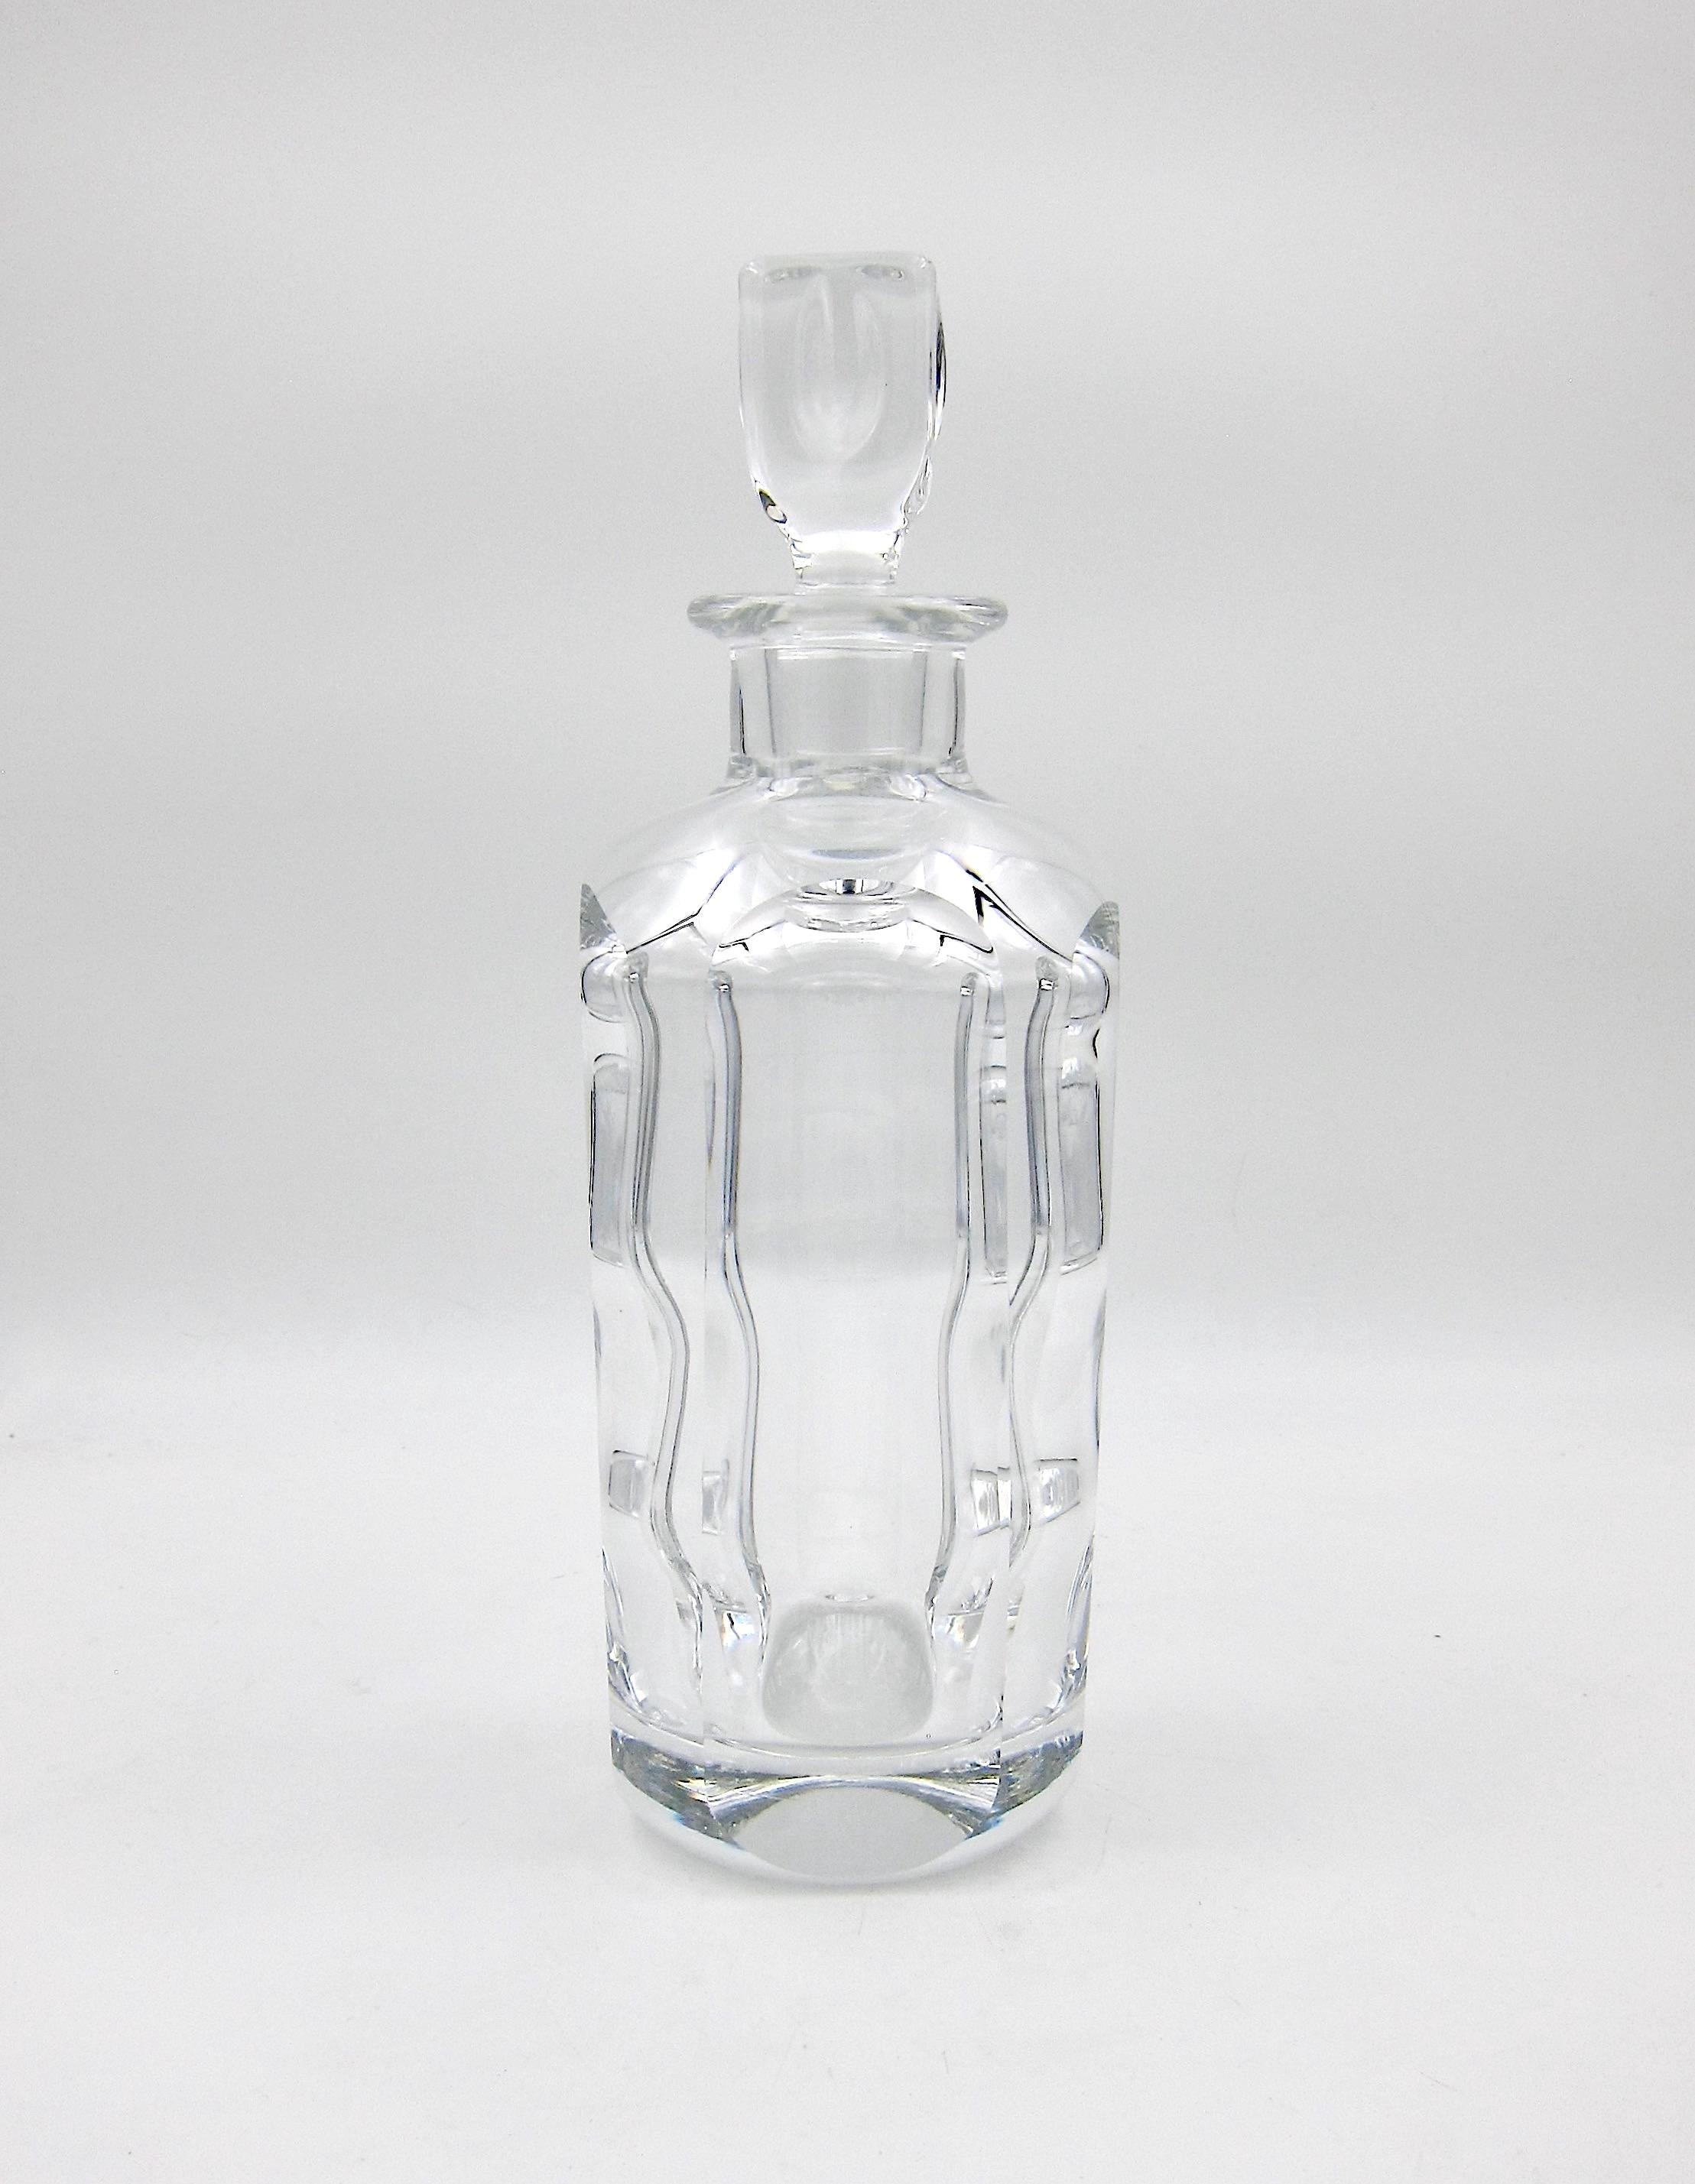 A vintage Scandinavian cut crystal decanter designed by Sven Palmqvist (Palmquist) for Orrefors of Sweden. The heavy clear crystal decanter has an elegant, modern look with an original stopper resembling an ice cube and long oval facets running the